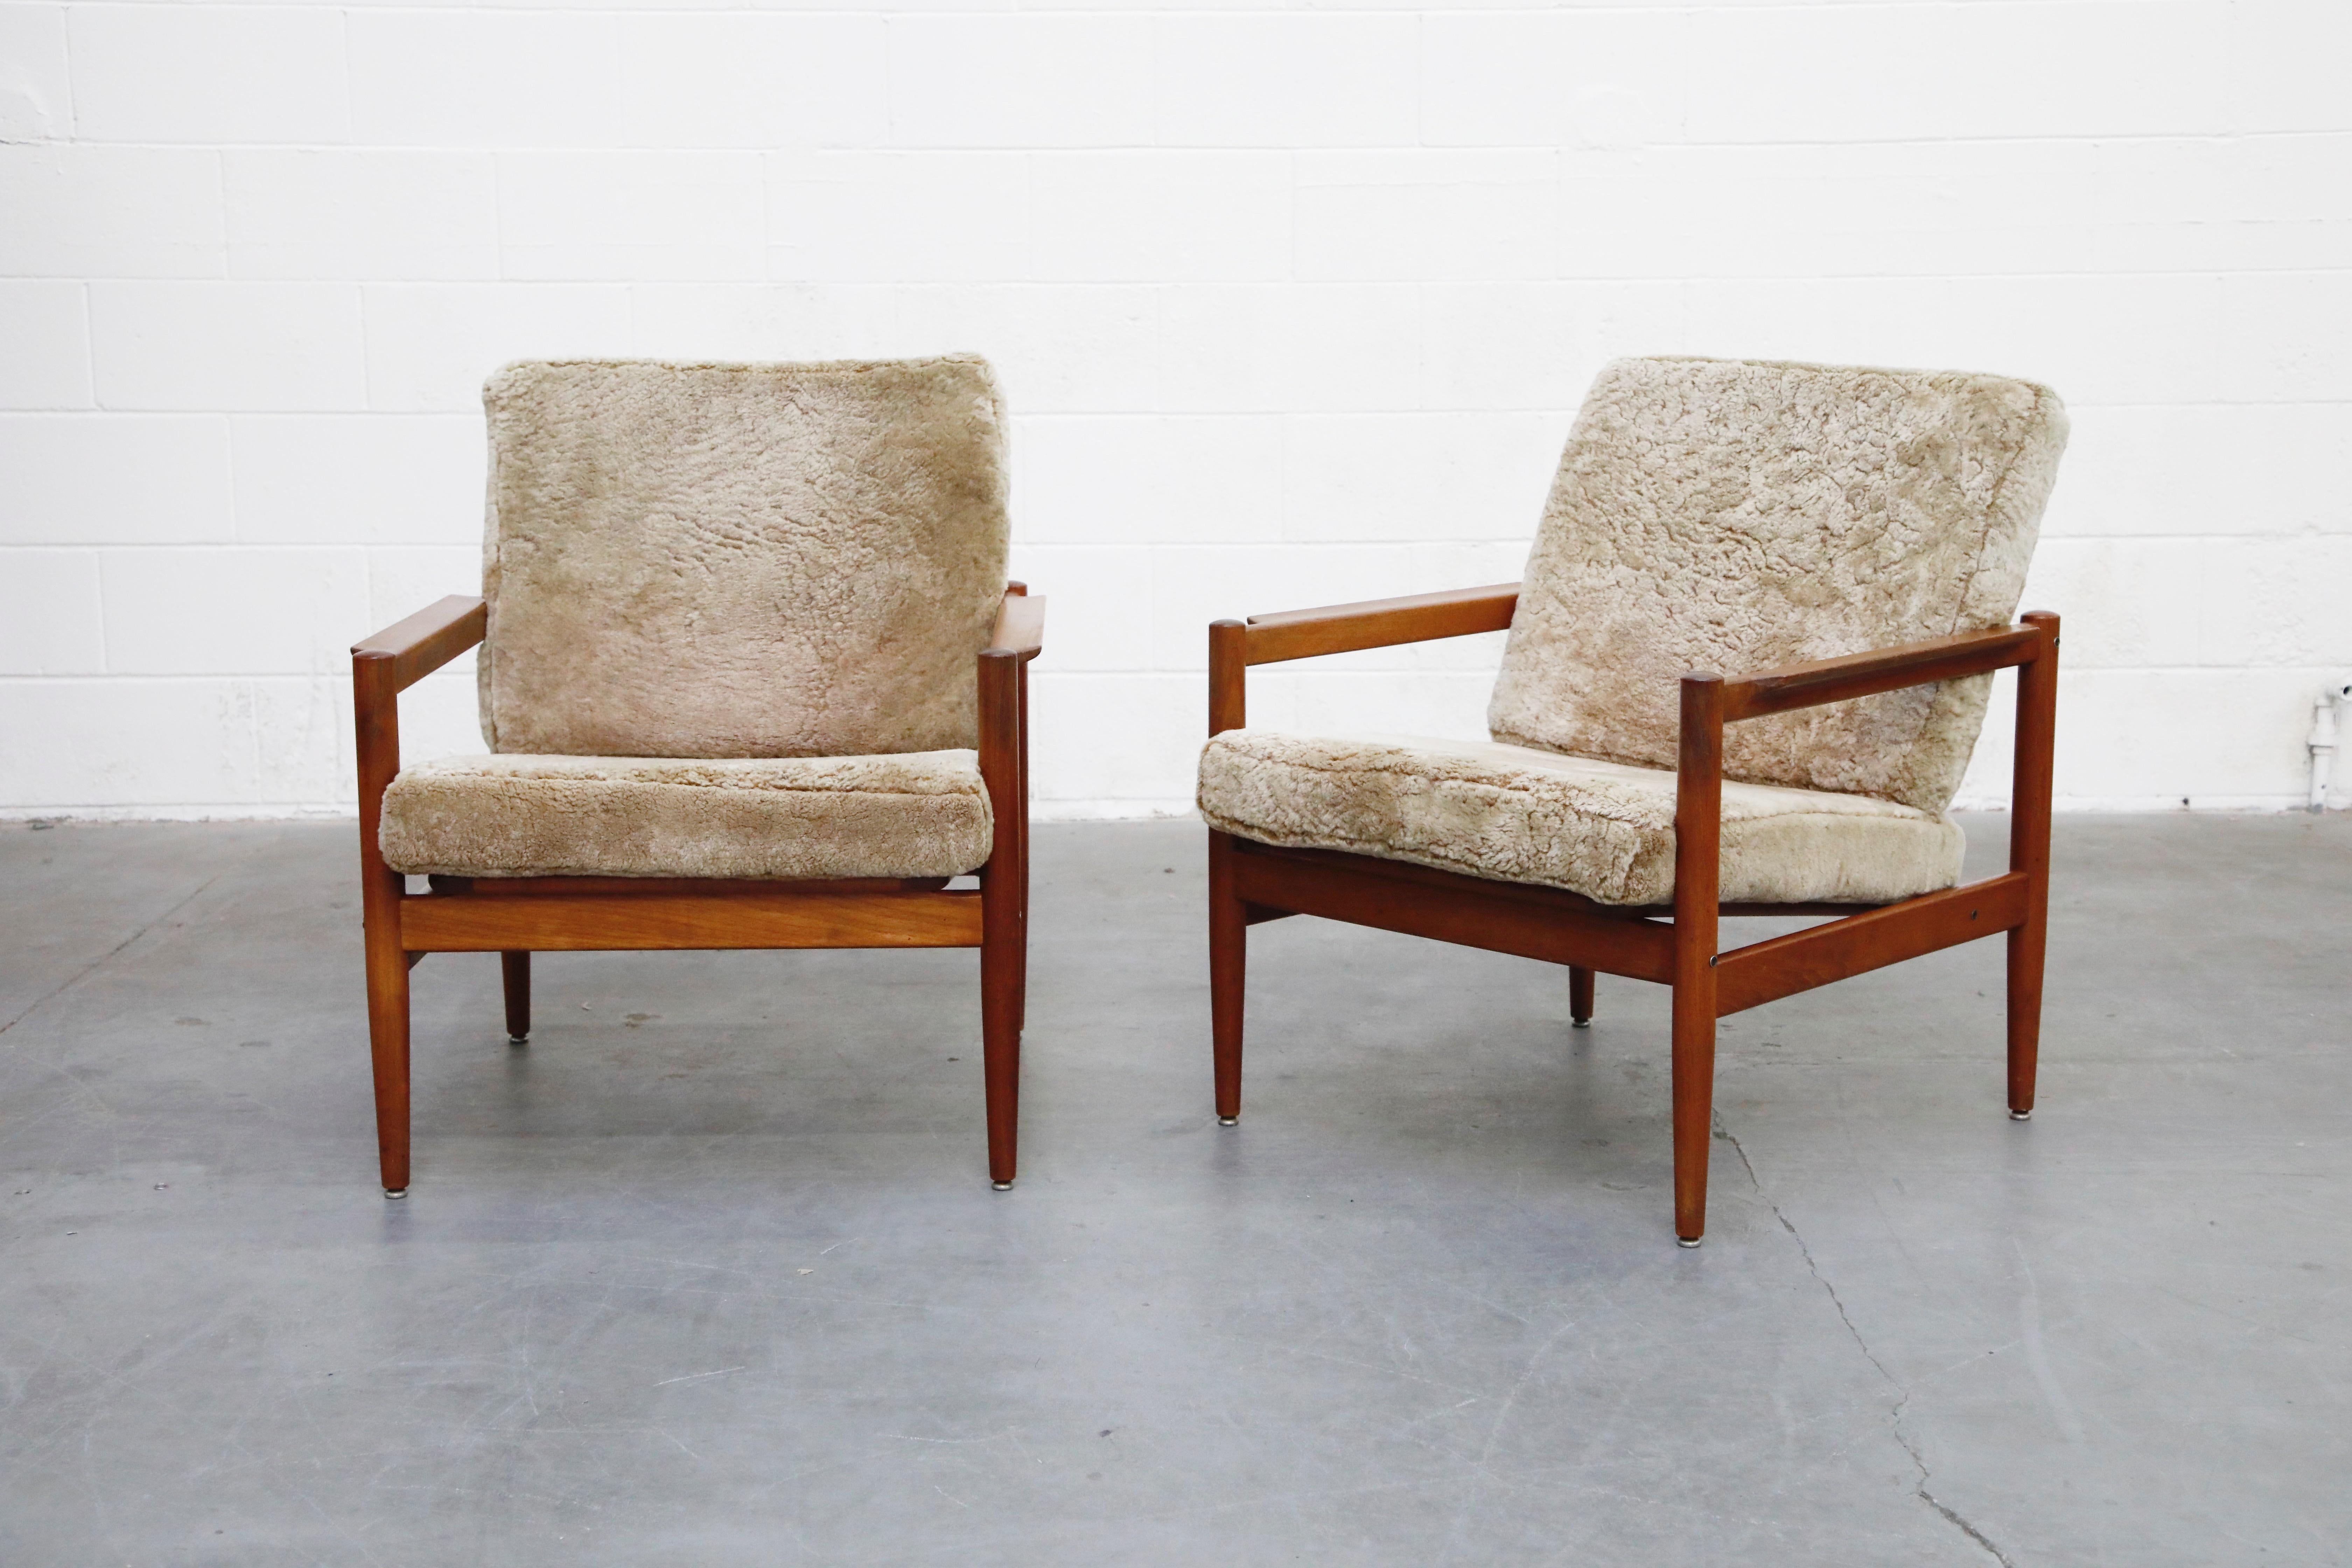 This pair of solid teak and shearling fur cushions lounge chairs are by Børge Jensen & Sønner for Bernstorffsminde Møbelfabrik. Featuring slatted wood backs, sculpted arms and nubby wooly shearling fur cushions, this is the perfect easy chair option